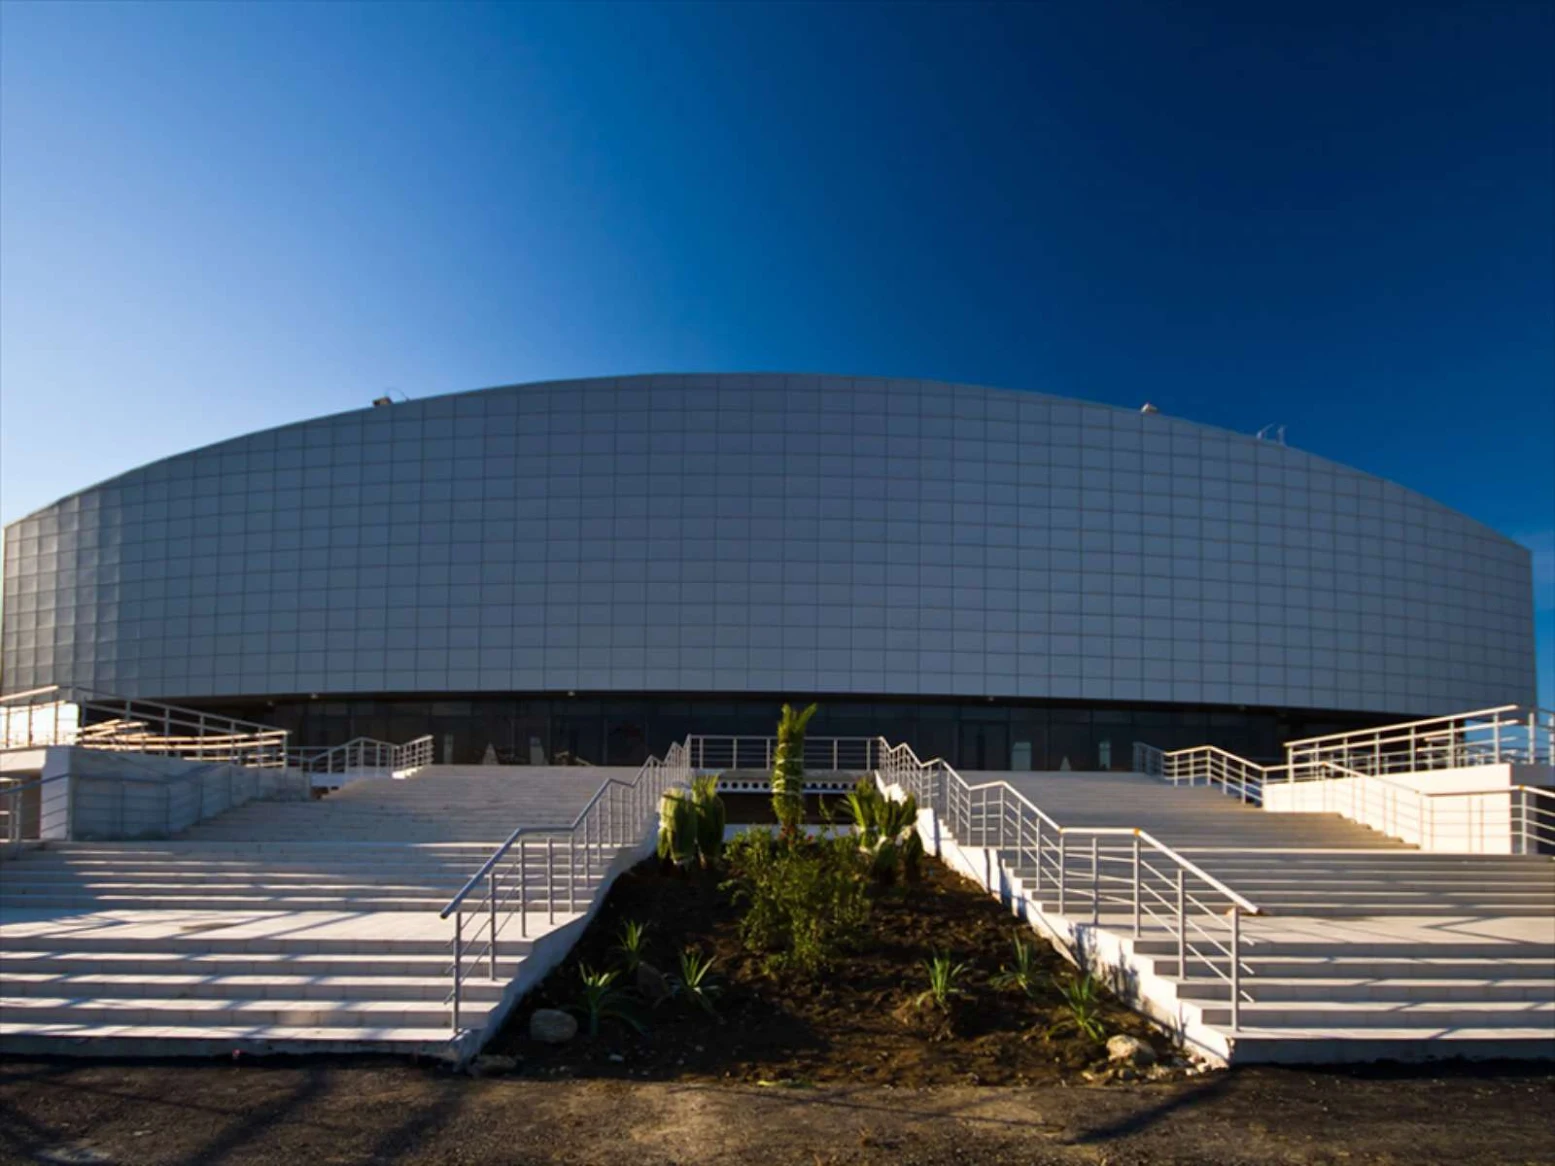 Sochi 2014 Olympics Architecture Ice Cube Curling Center